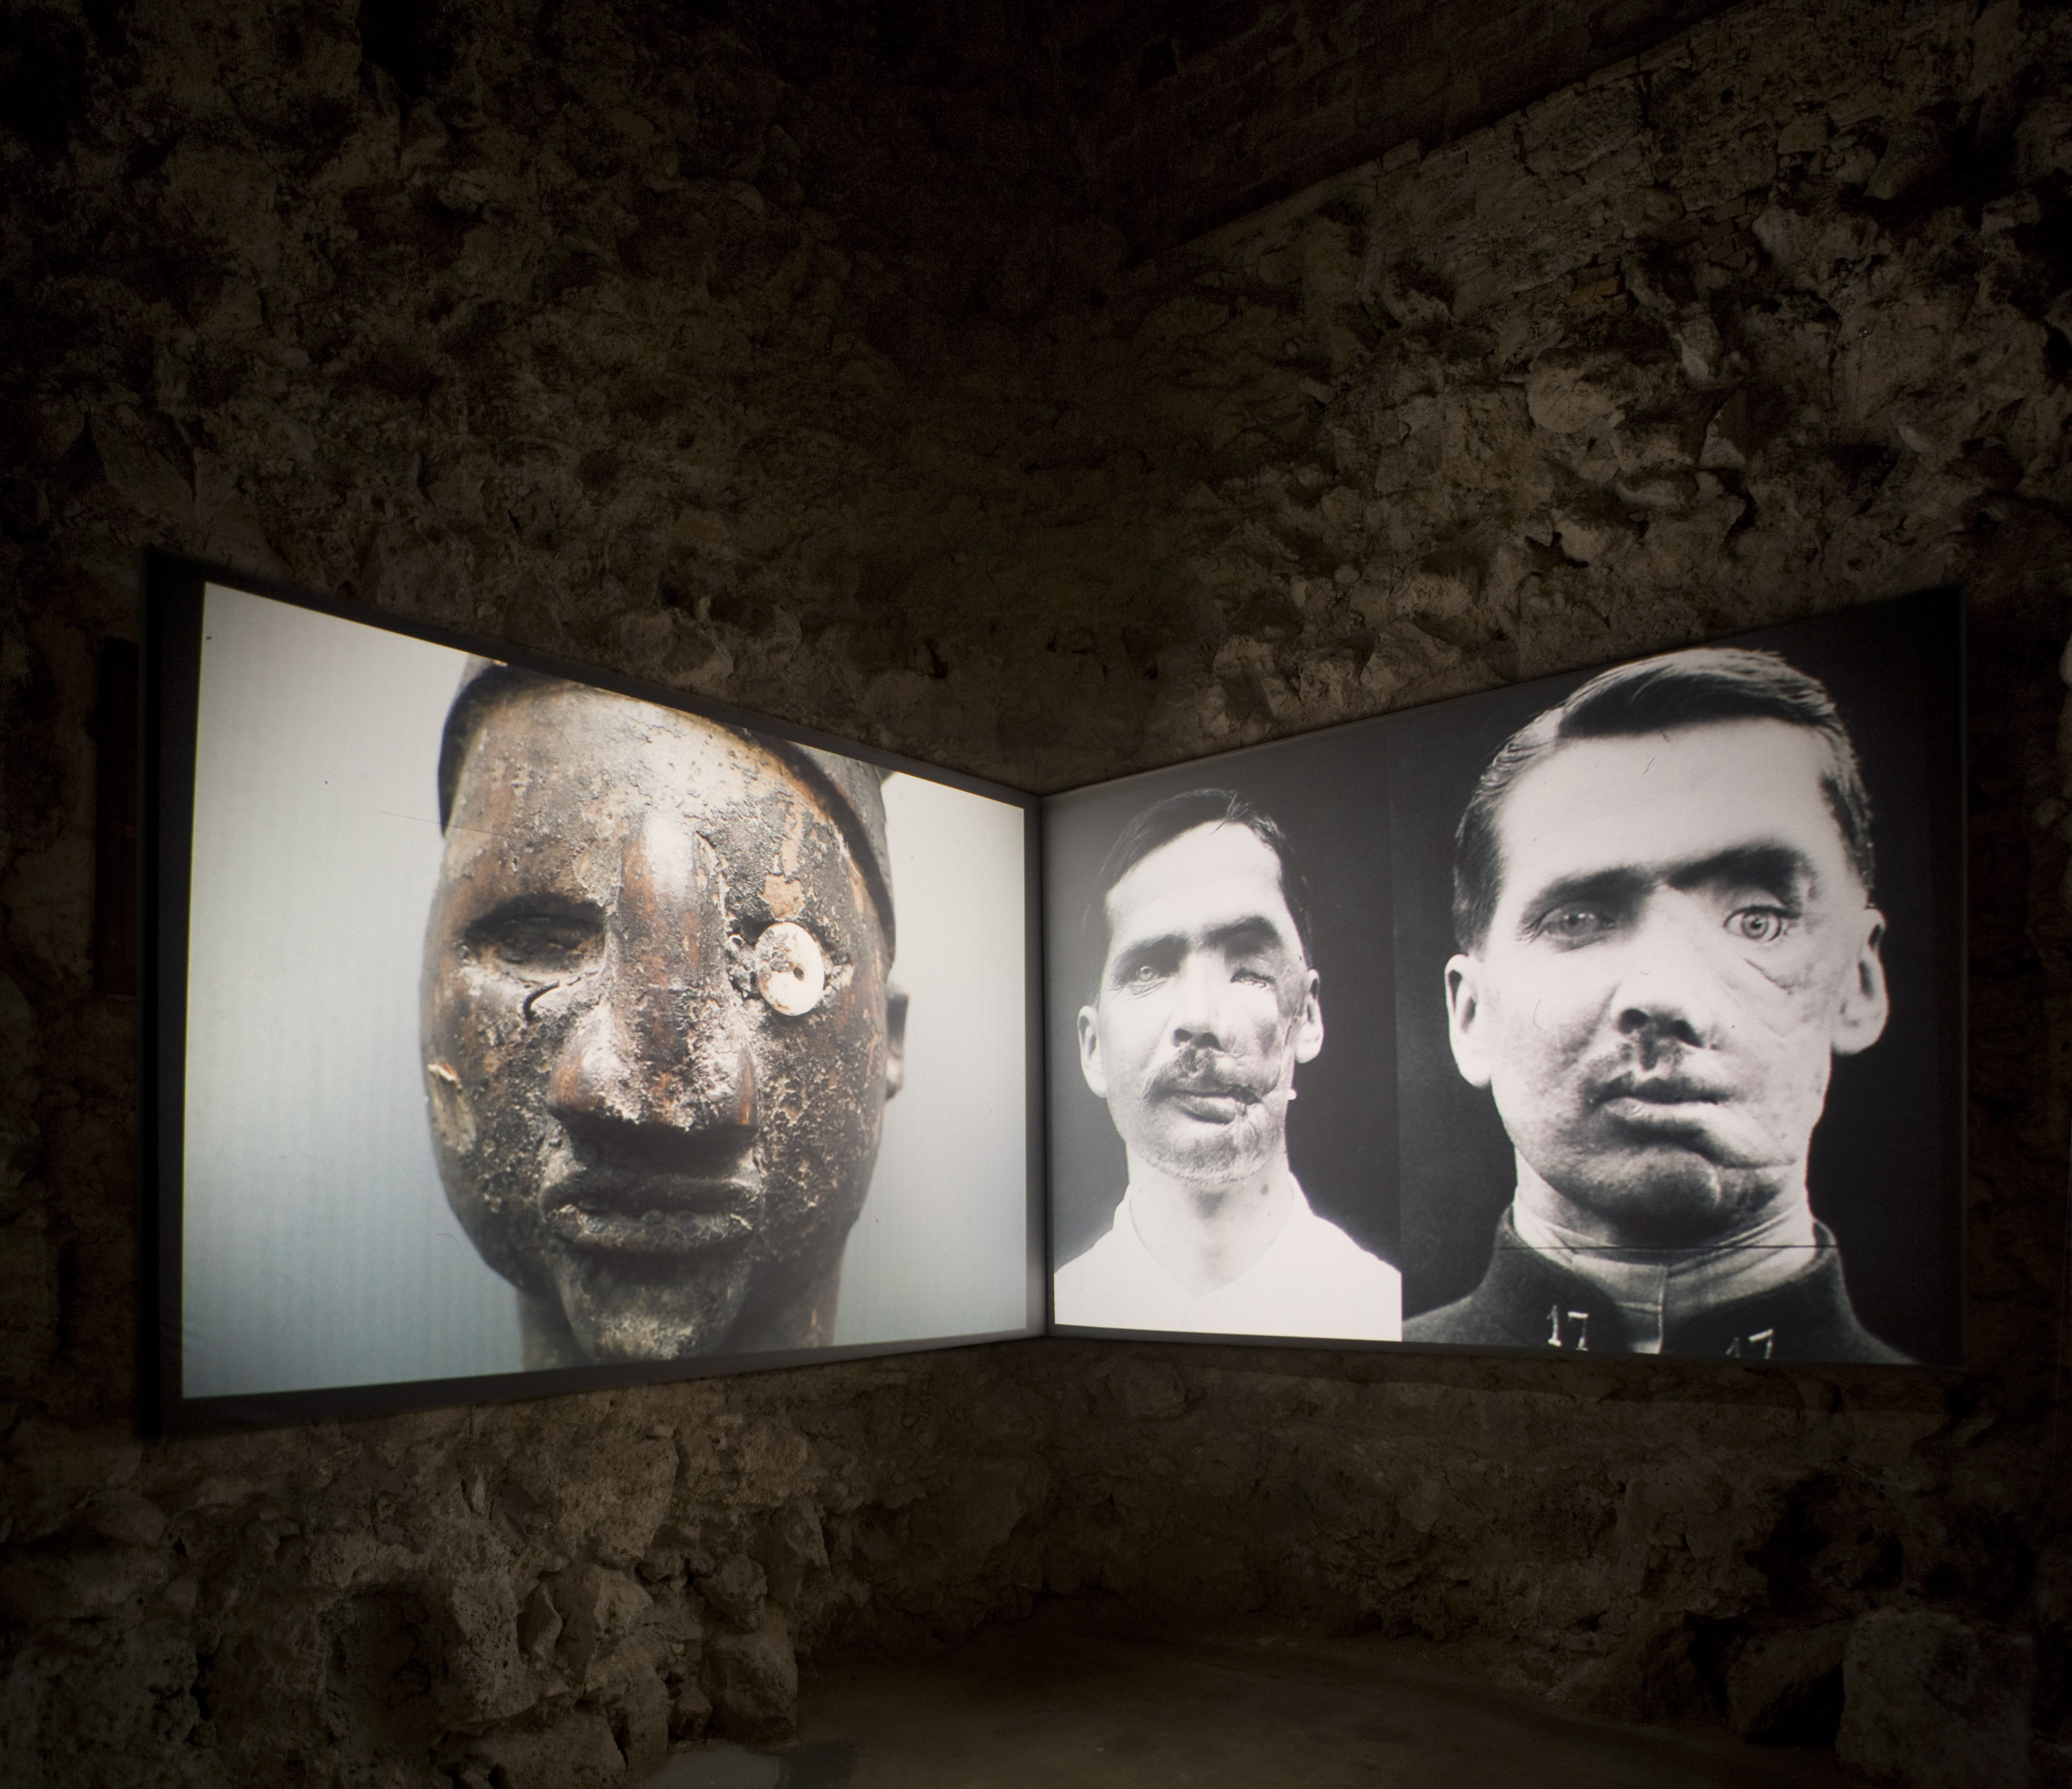 Kader Attia, Open your eyes, 2014, two sets of 80 black and white and color slides, Collezione E. Righi. Courtesy Galleria Continua, San Gimignano - Beijing - Les Moulins - Habana